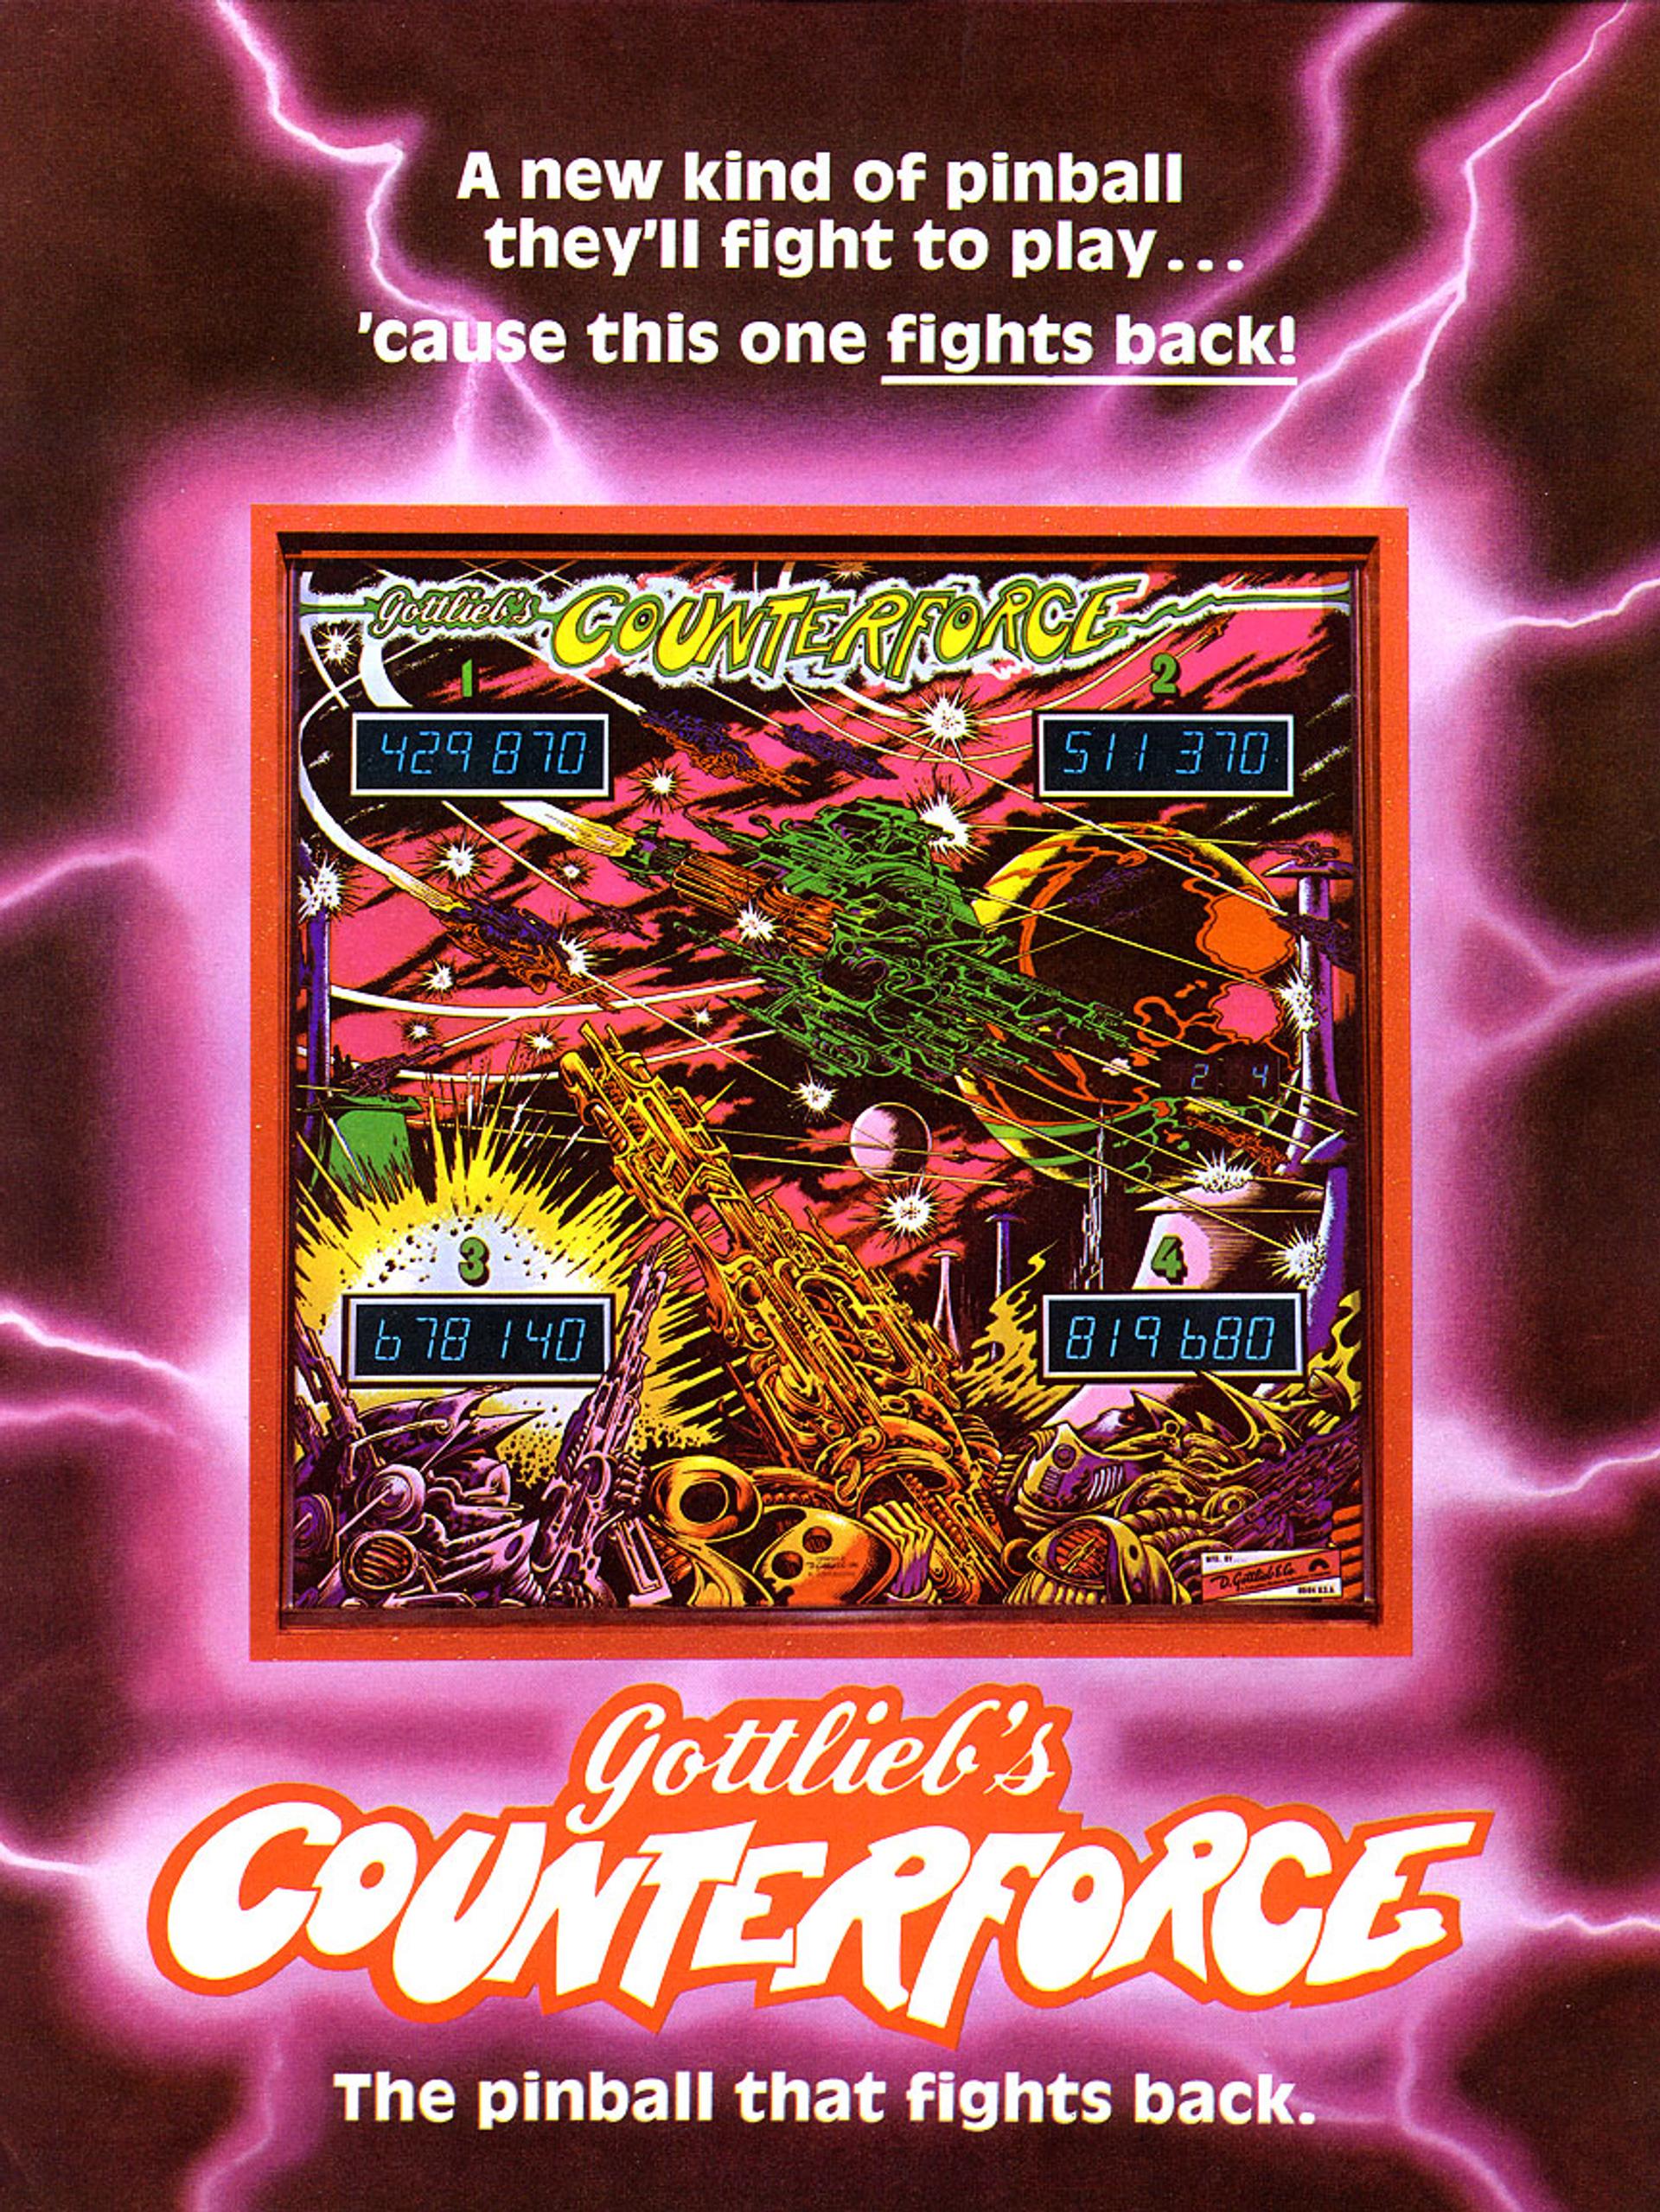 Counterforce Flyer front